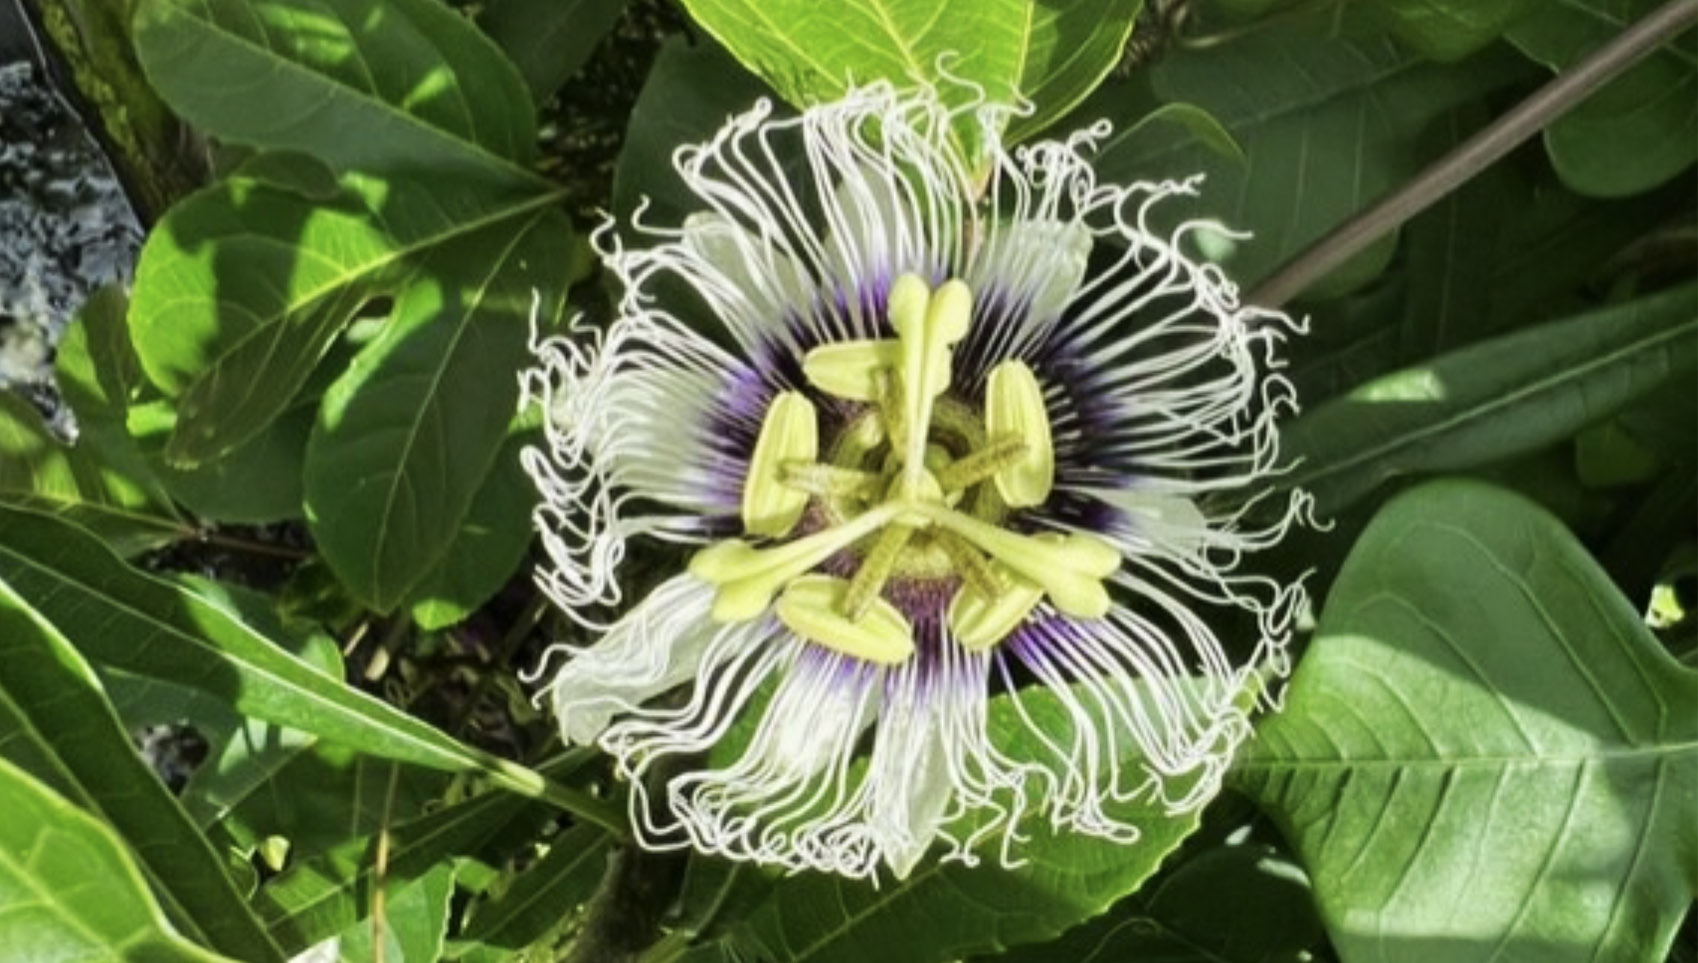 A passionflower growing in the wild in the Caribbean